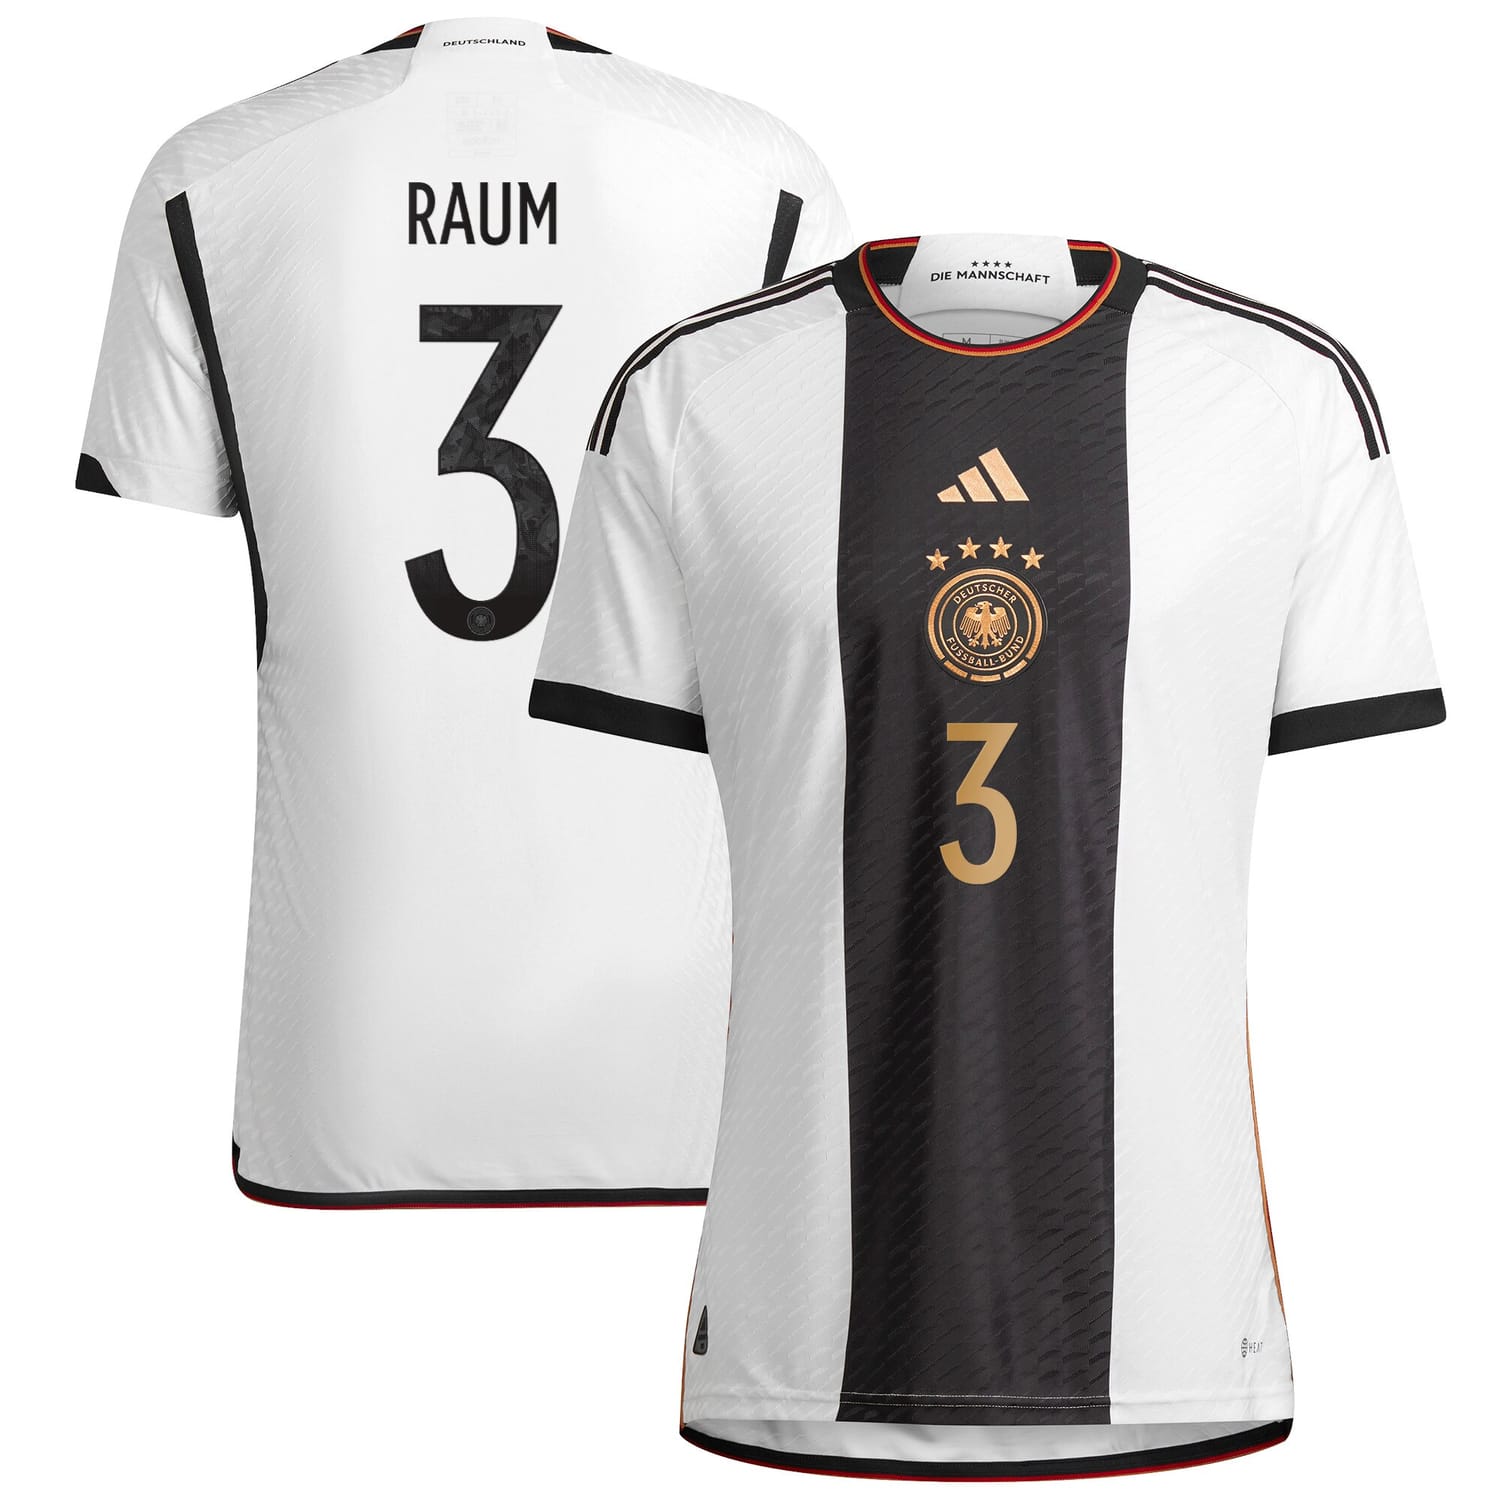 Germany National Team Home Authentic Jersey Shirt player David Raum 3 printing for Men